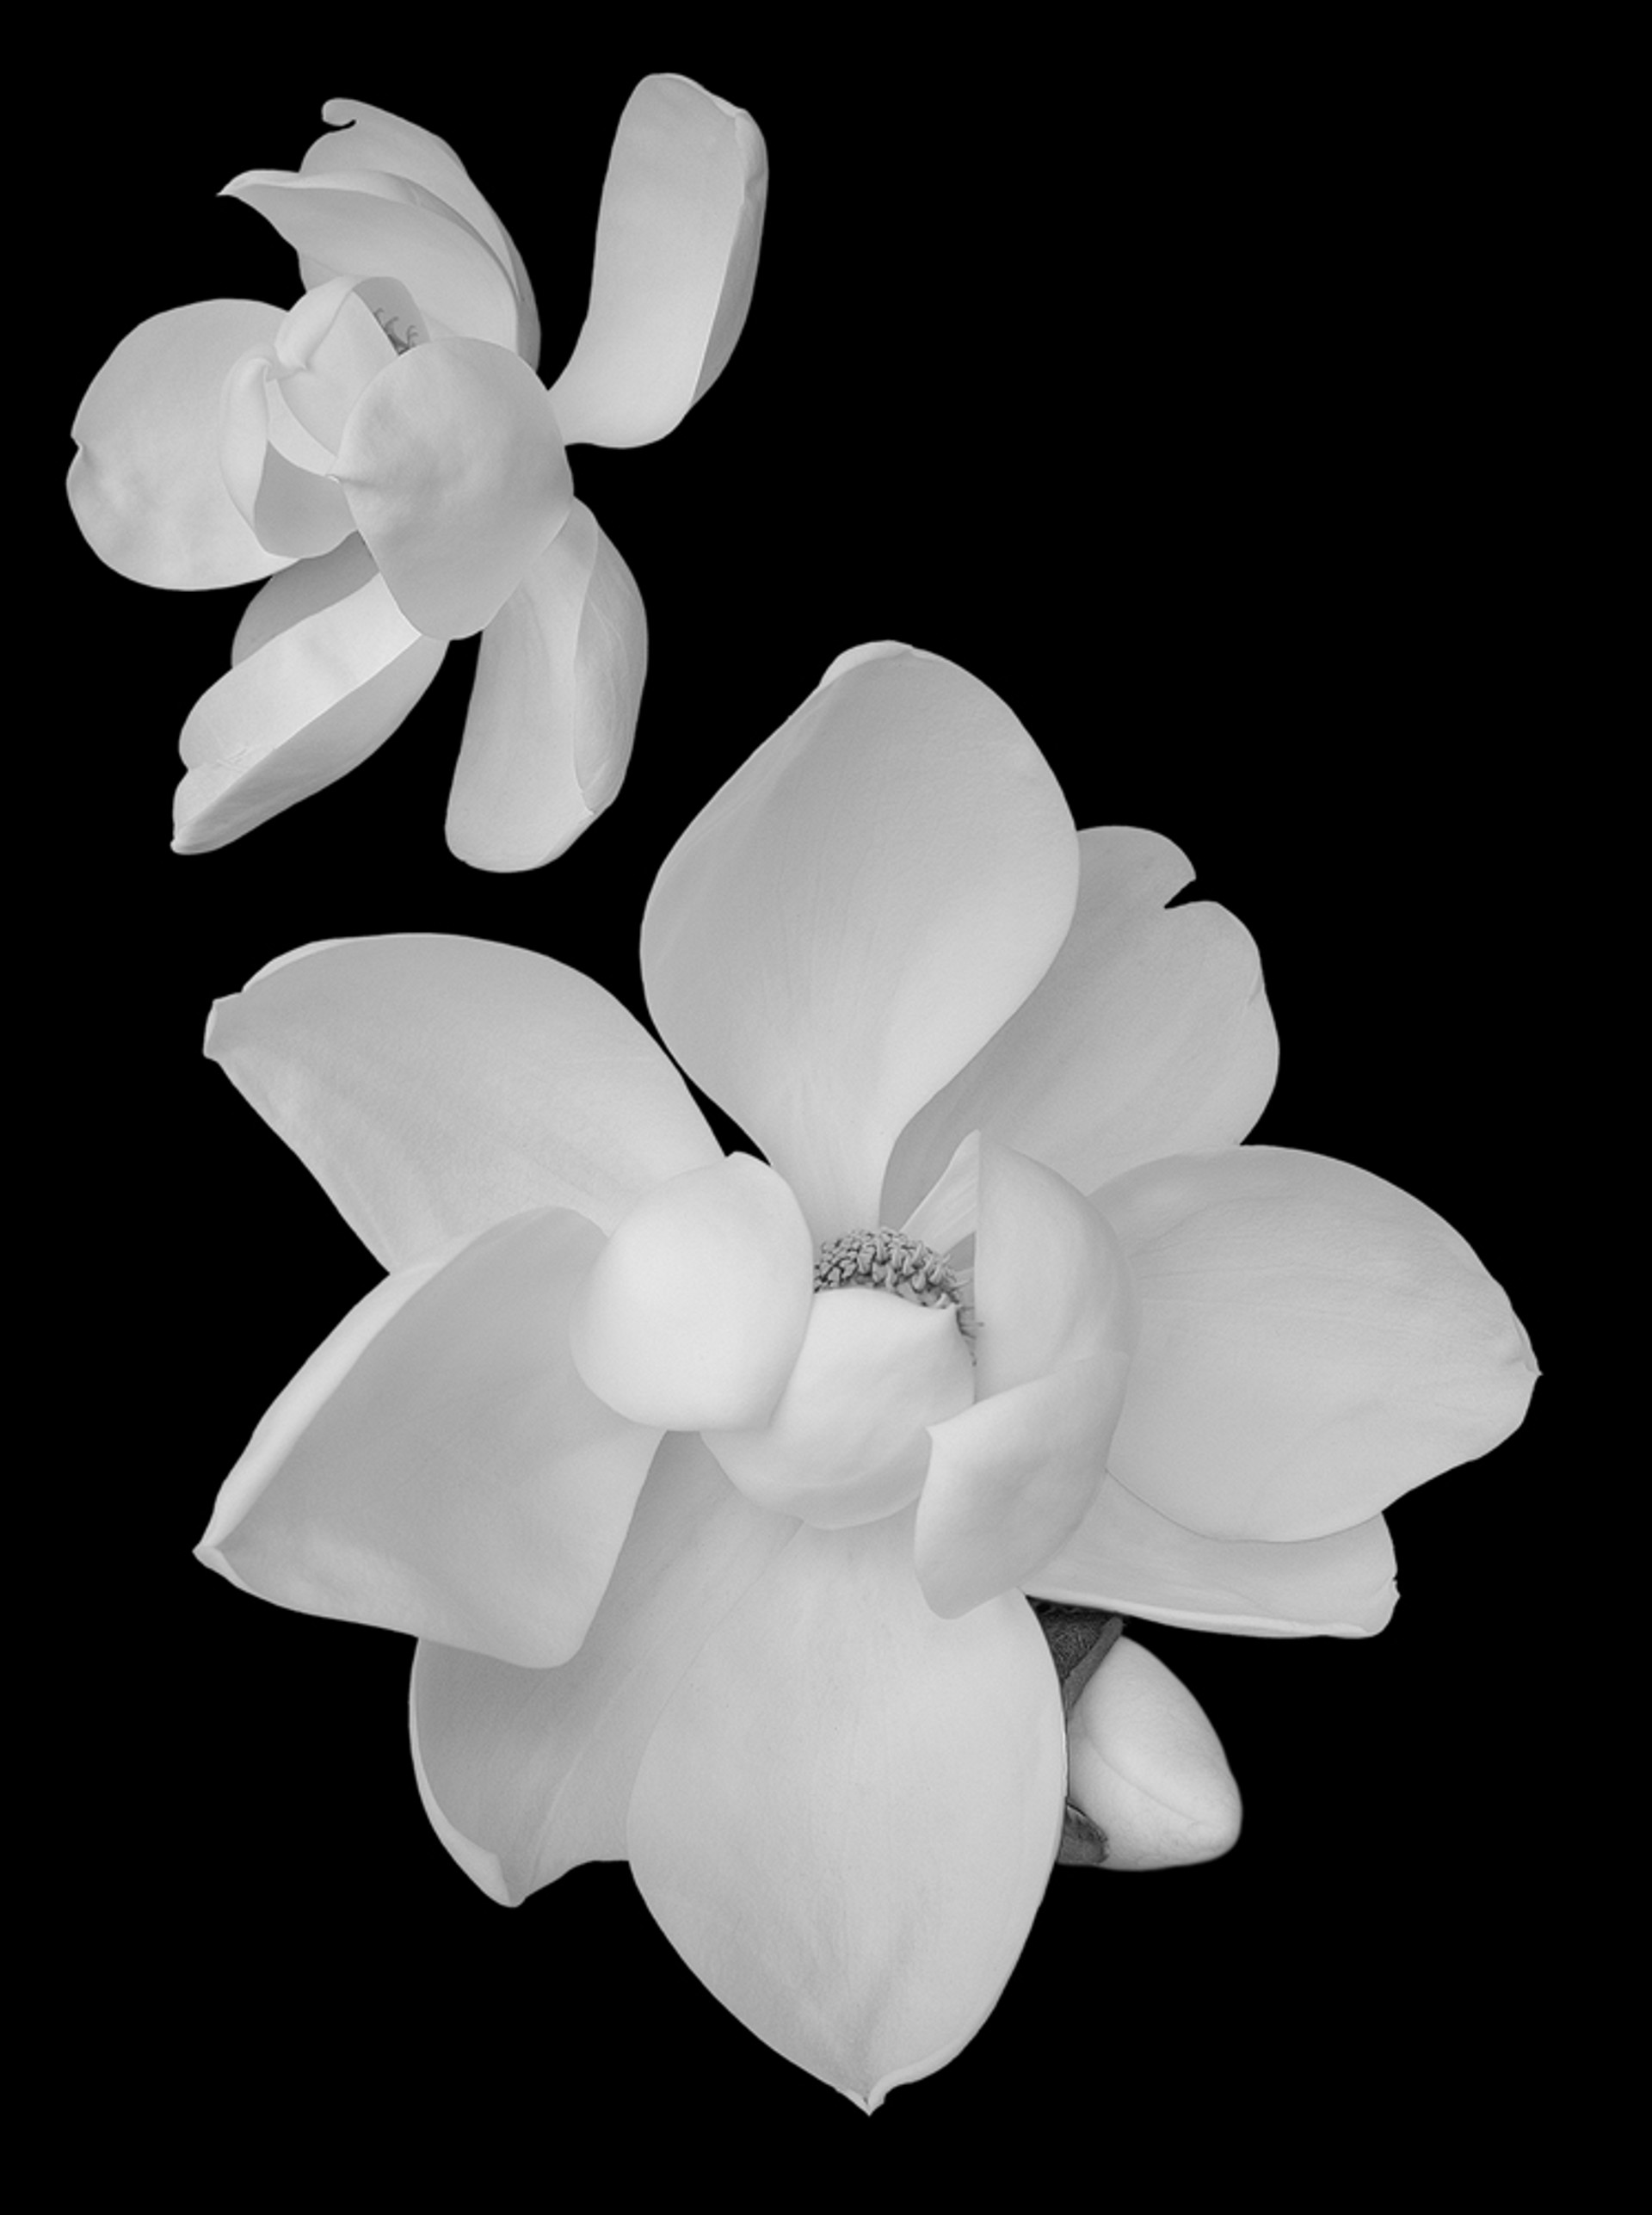 Southern Magnolia Blossoms by Barry Vangrov